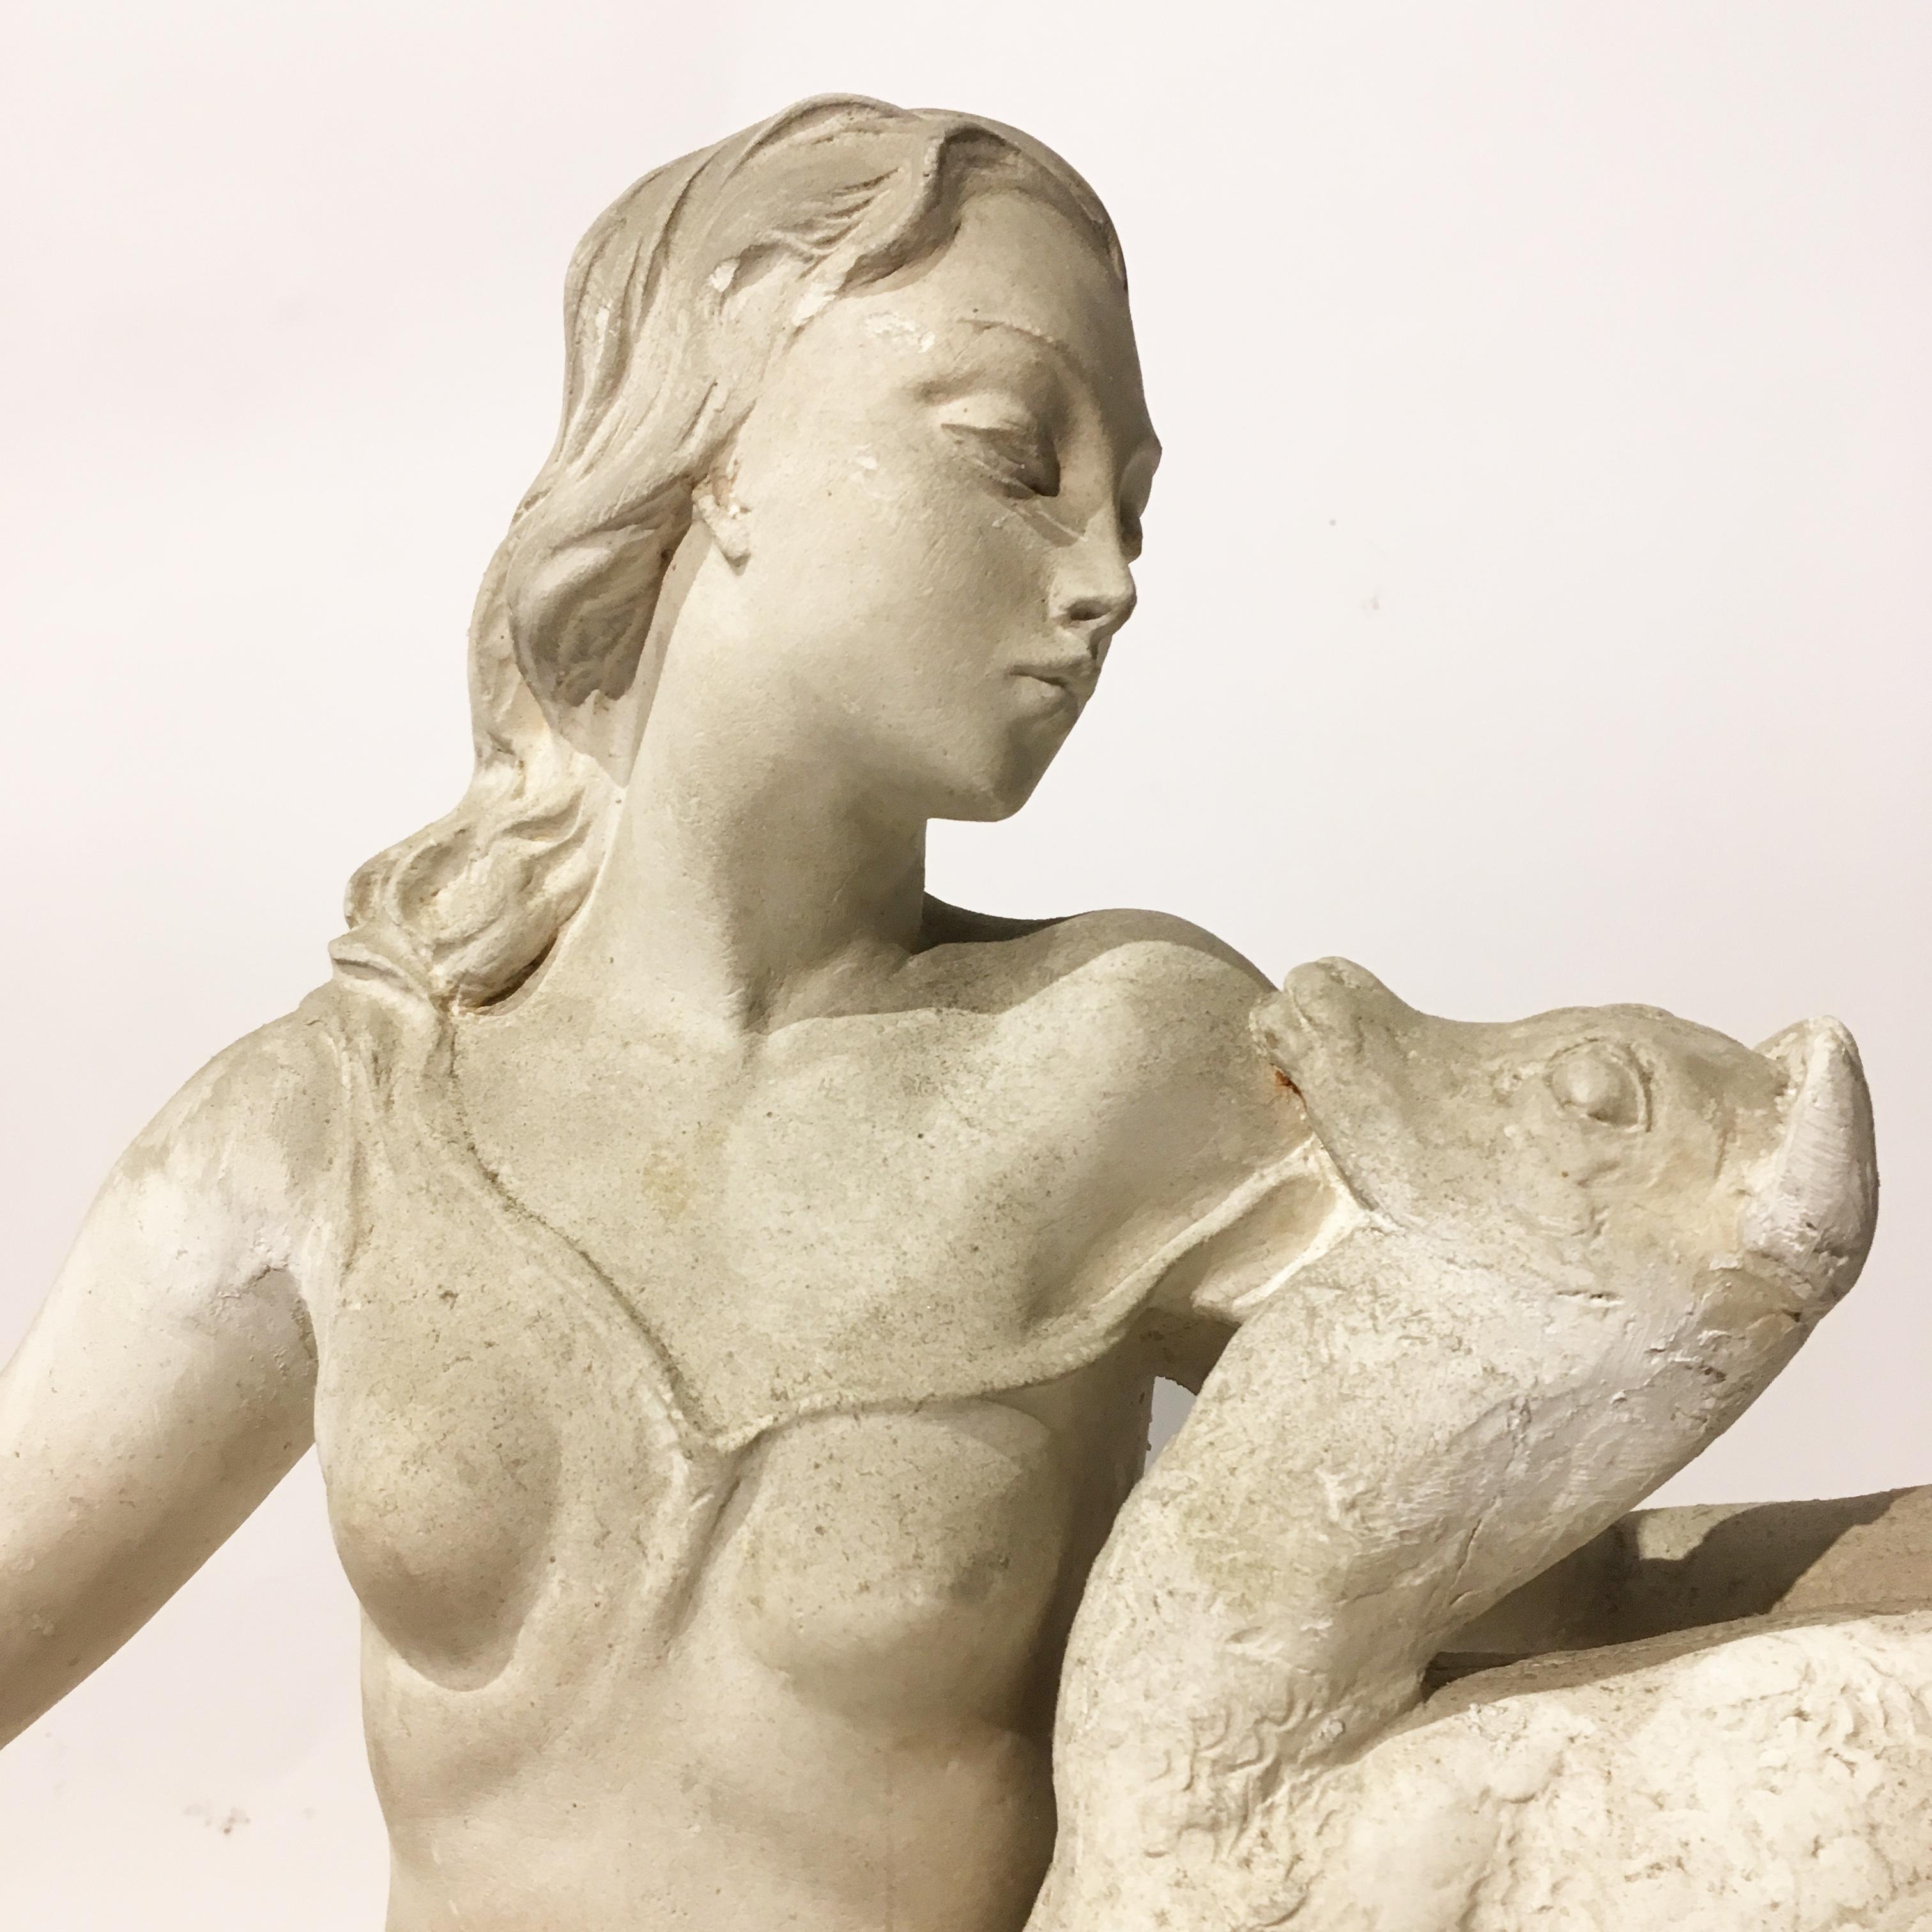 Early 20th Century Italian Art Deco Plaster Sculpture by Mario Bandini For Sale 7